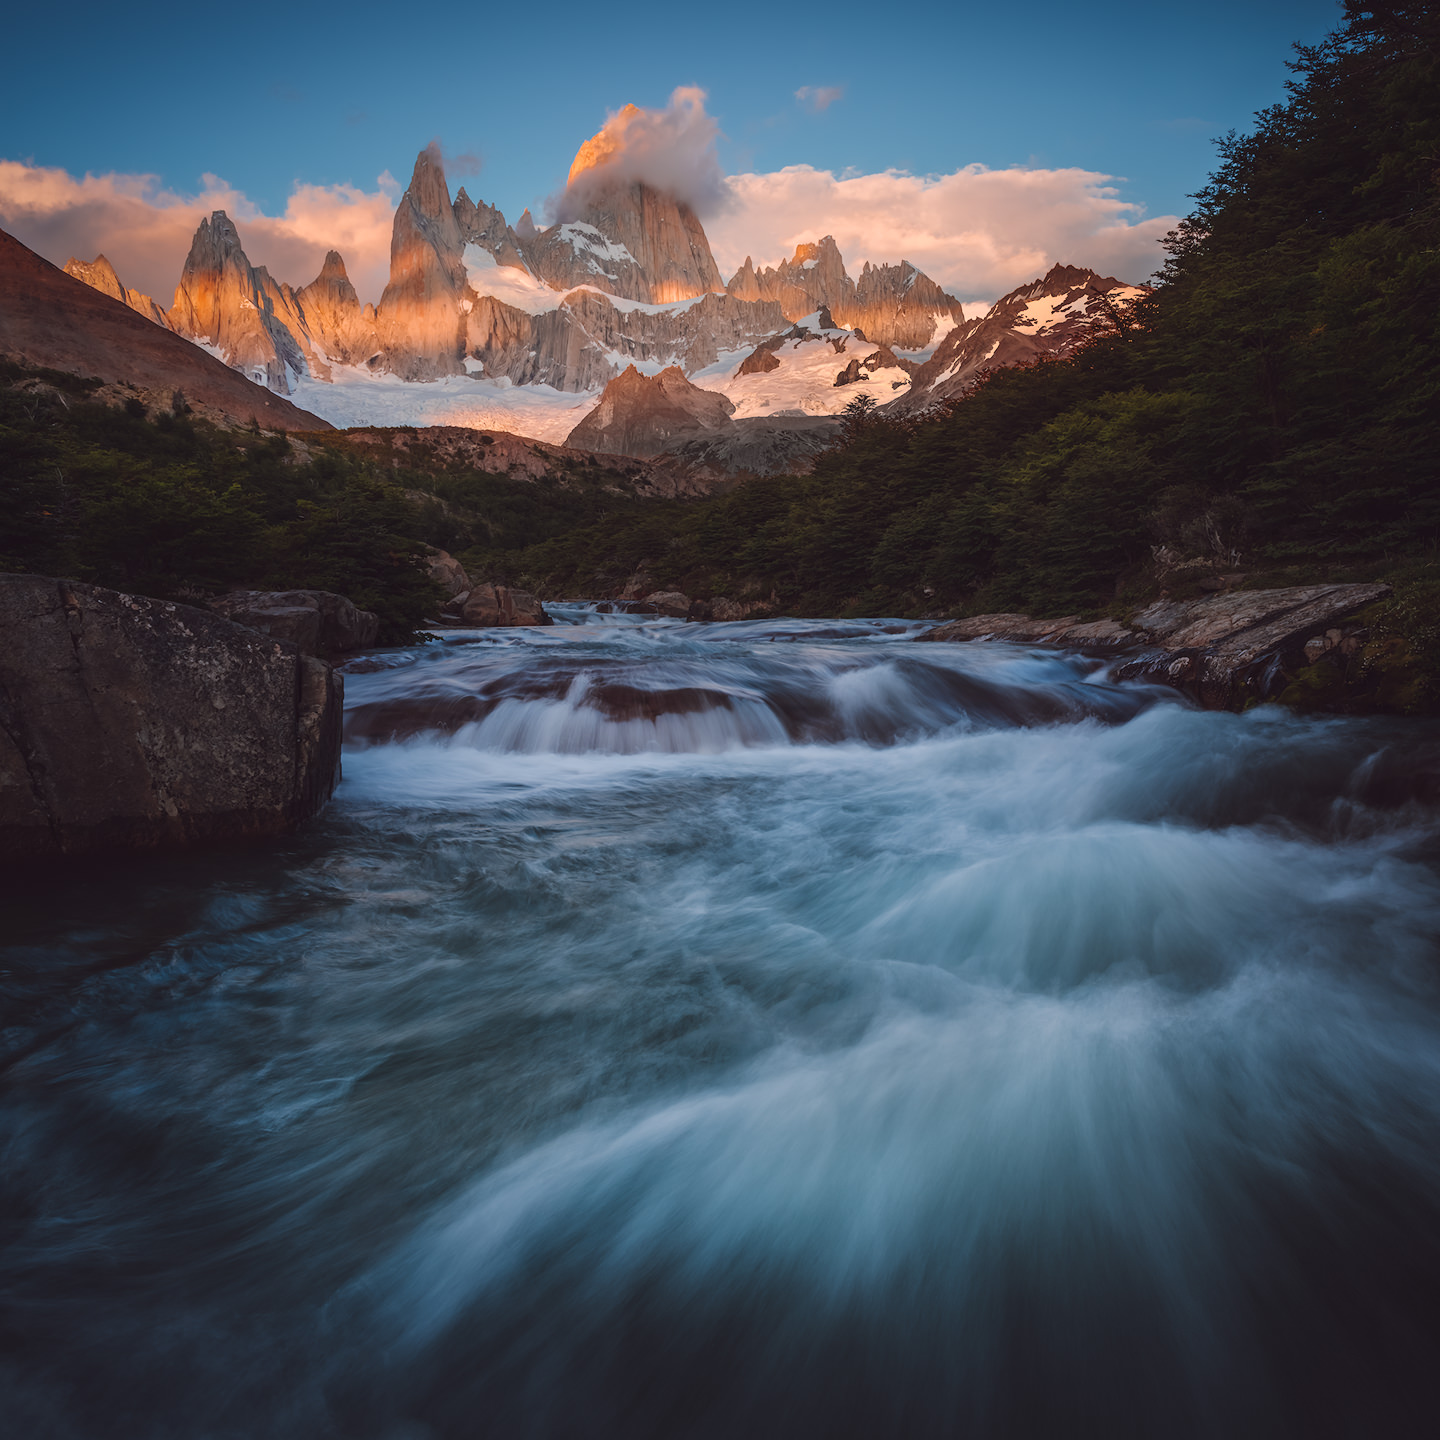 Fitz Roy and the rapids of Chorillo del Salto at sunrise